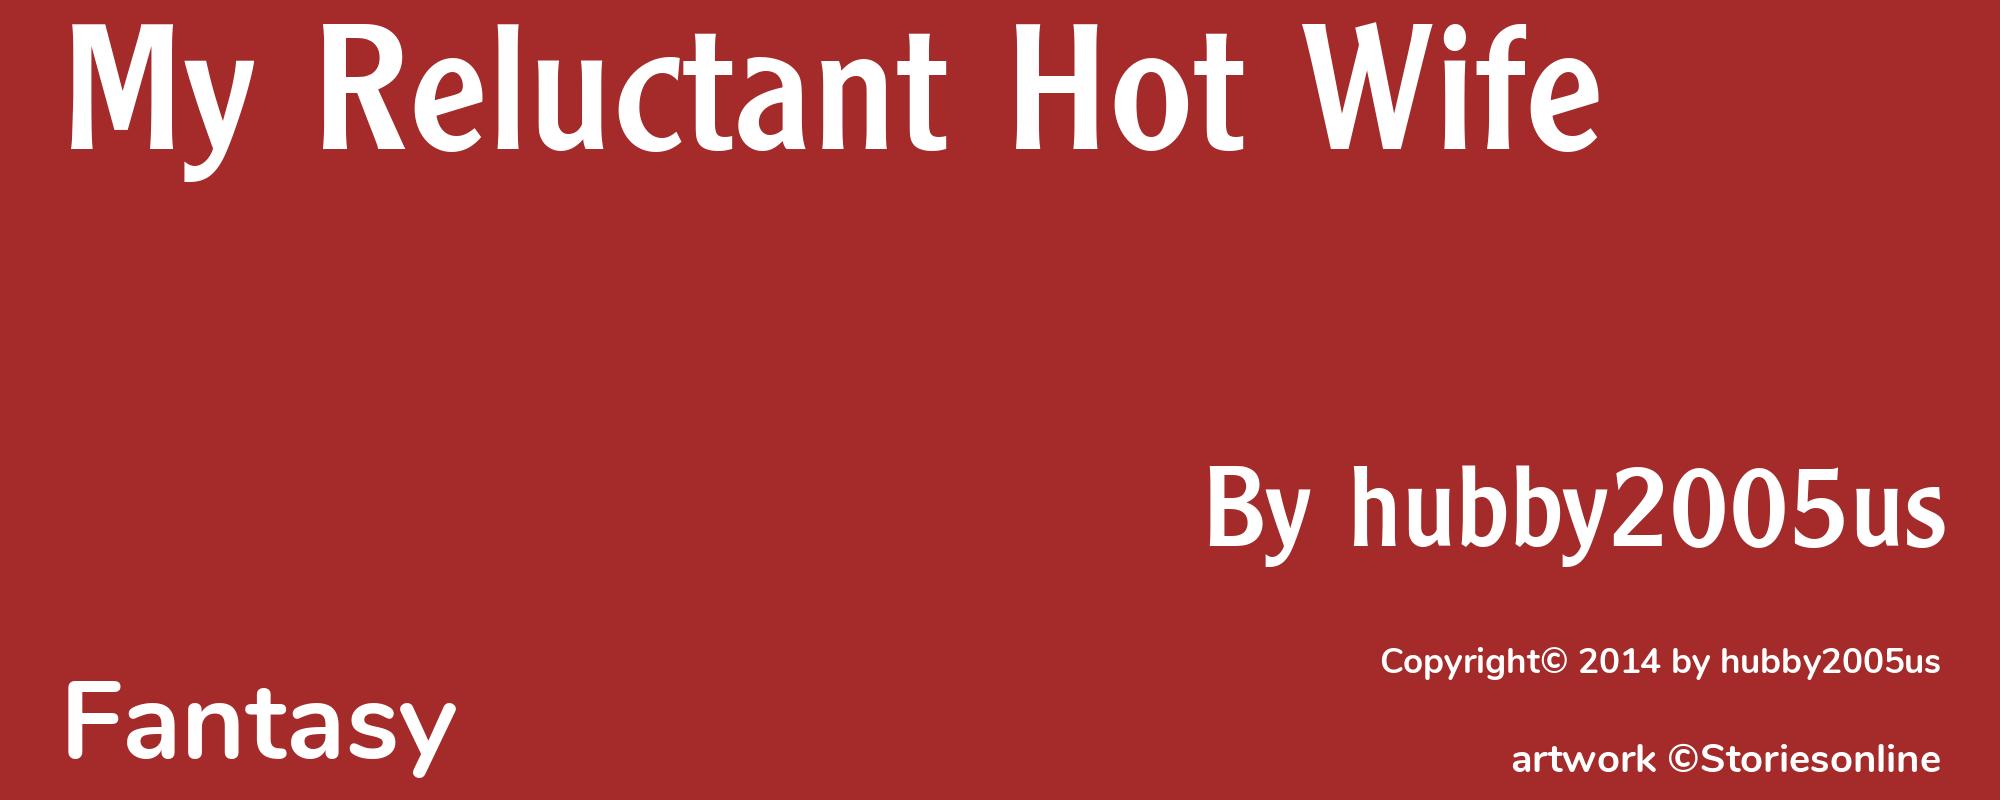 My Reluctant Hot Wife - Cover